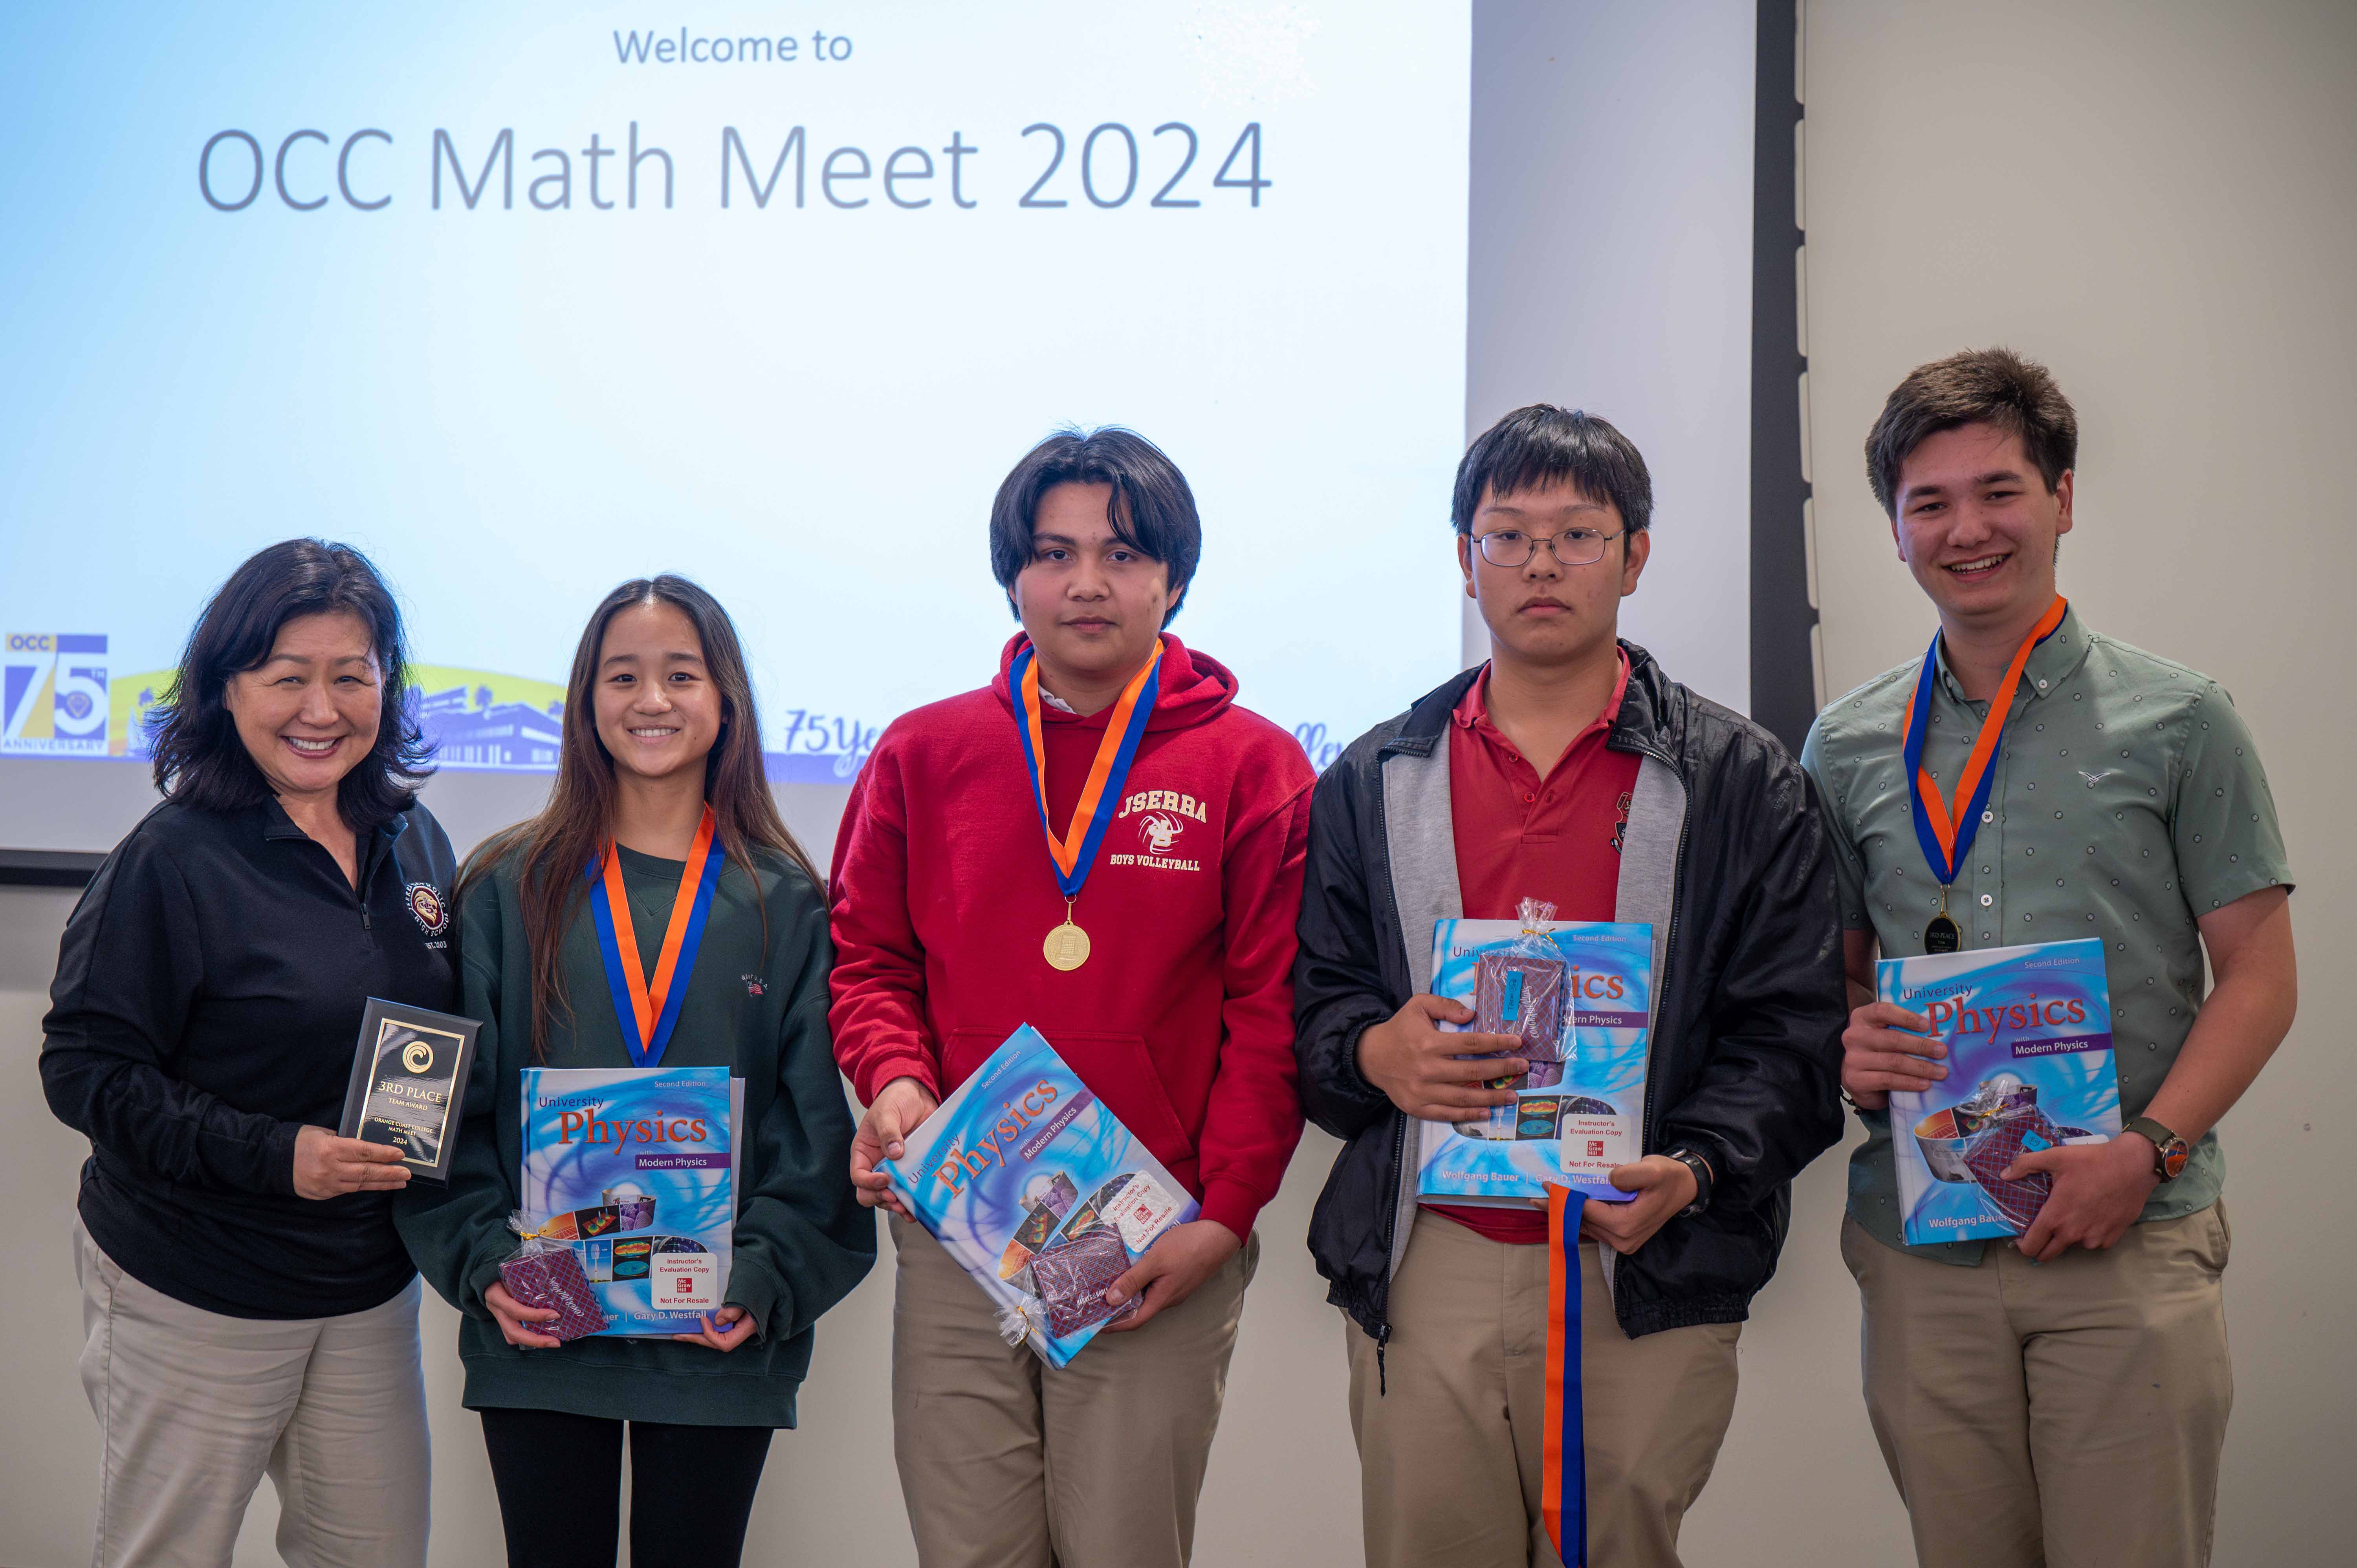 Jserra Catholic High School students receive their plaque and medals for third place at the OCC Math Meet